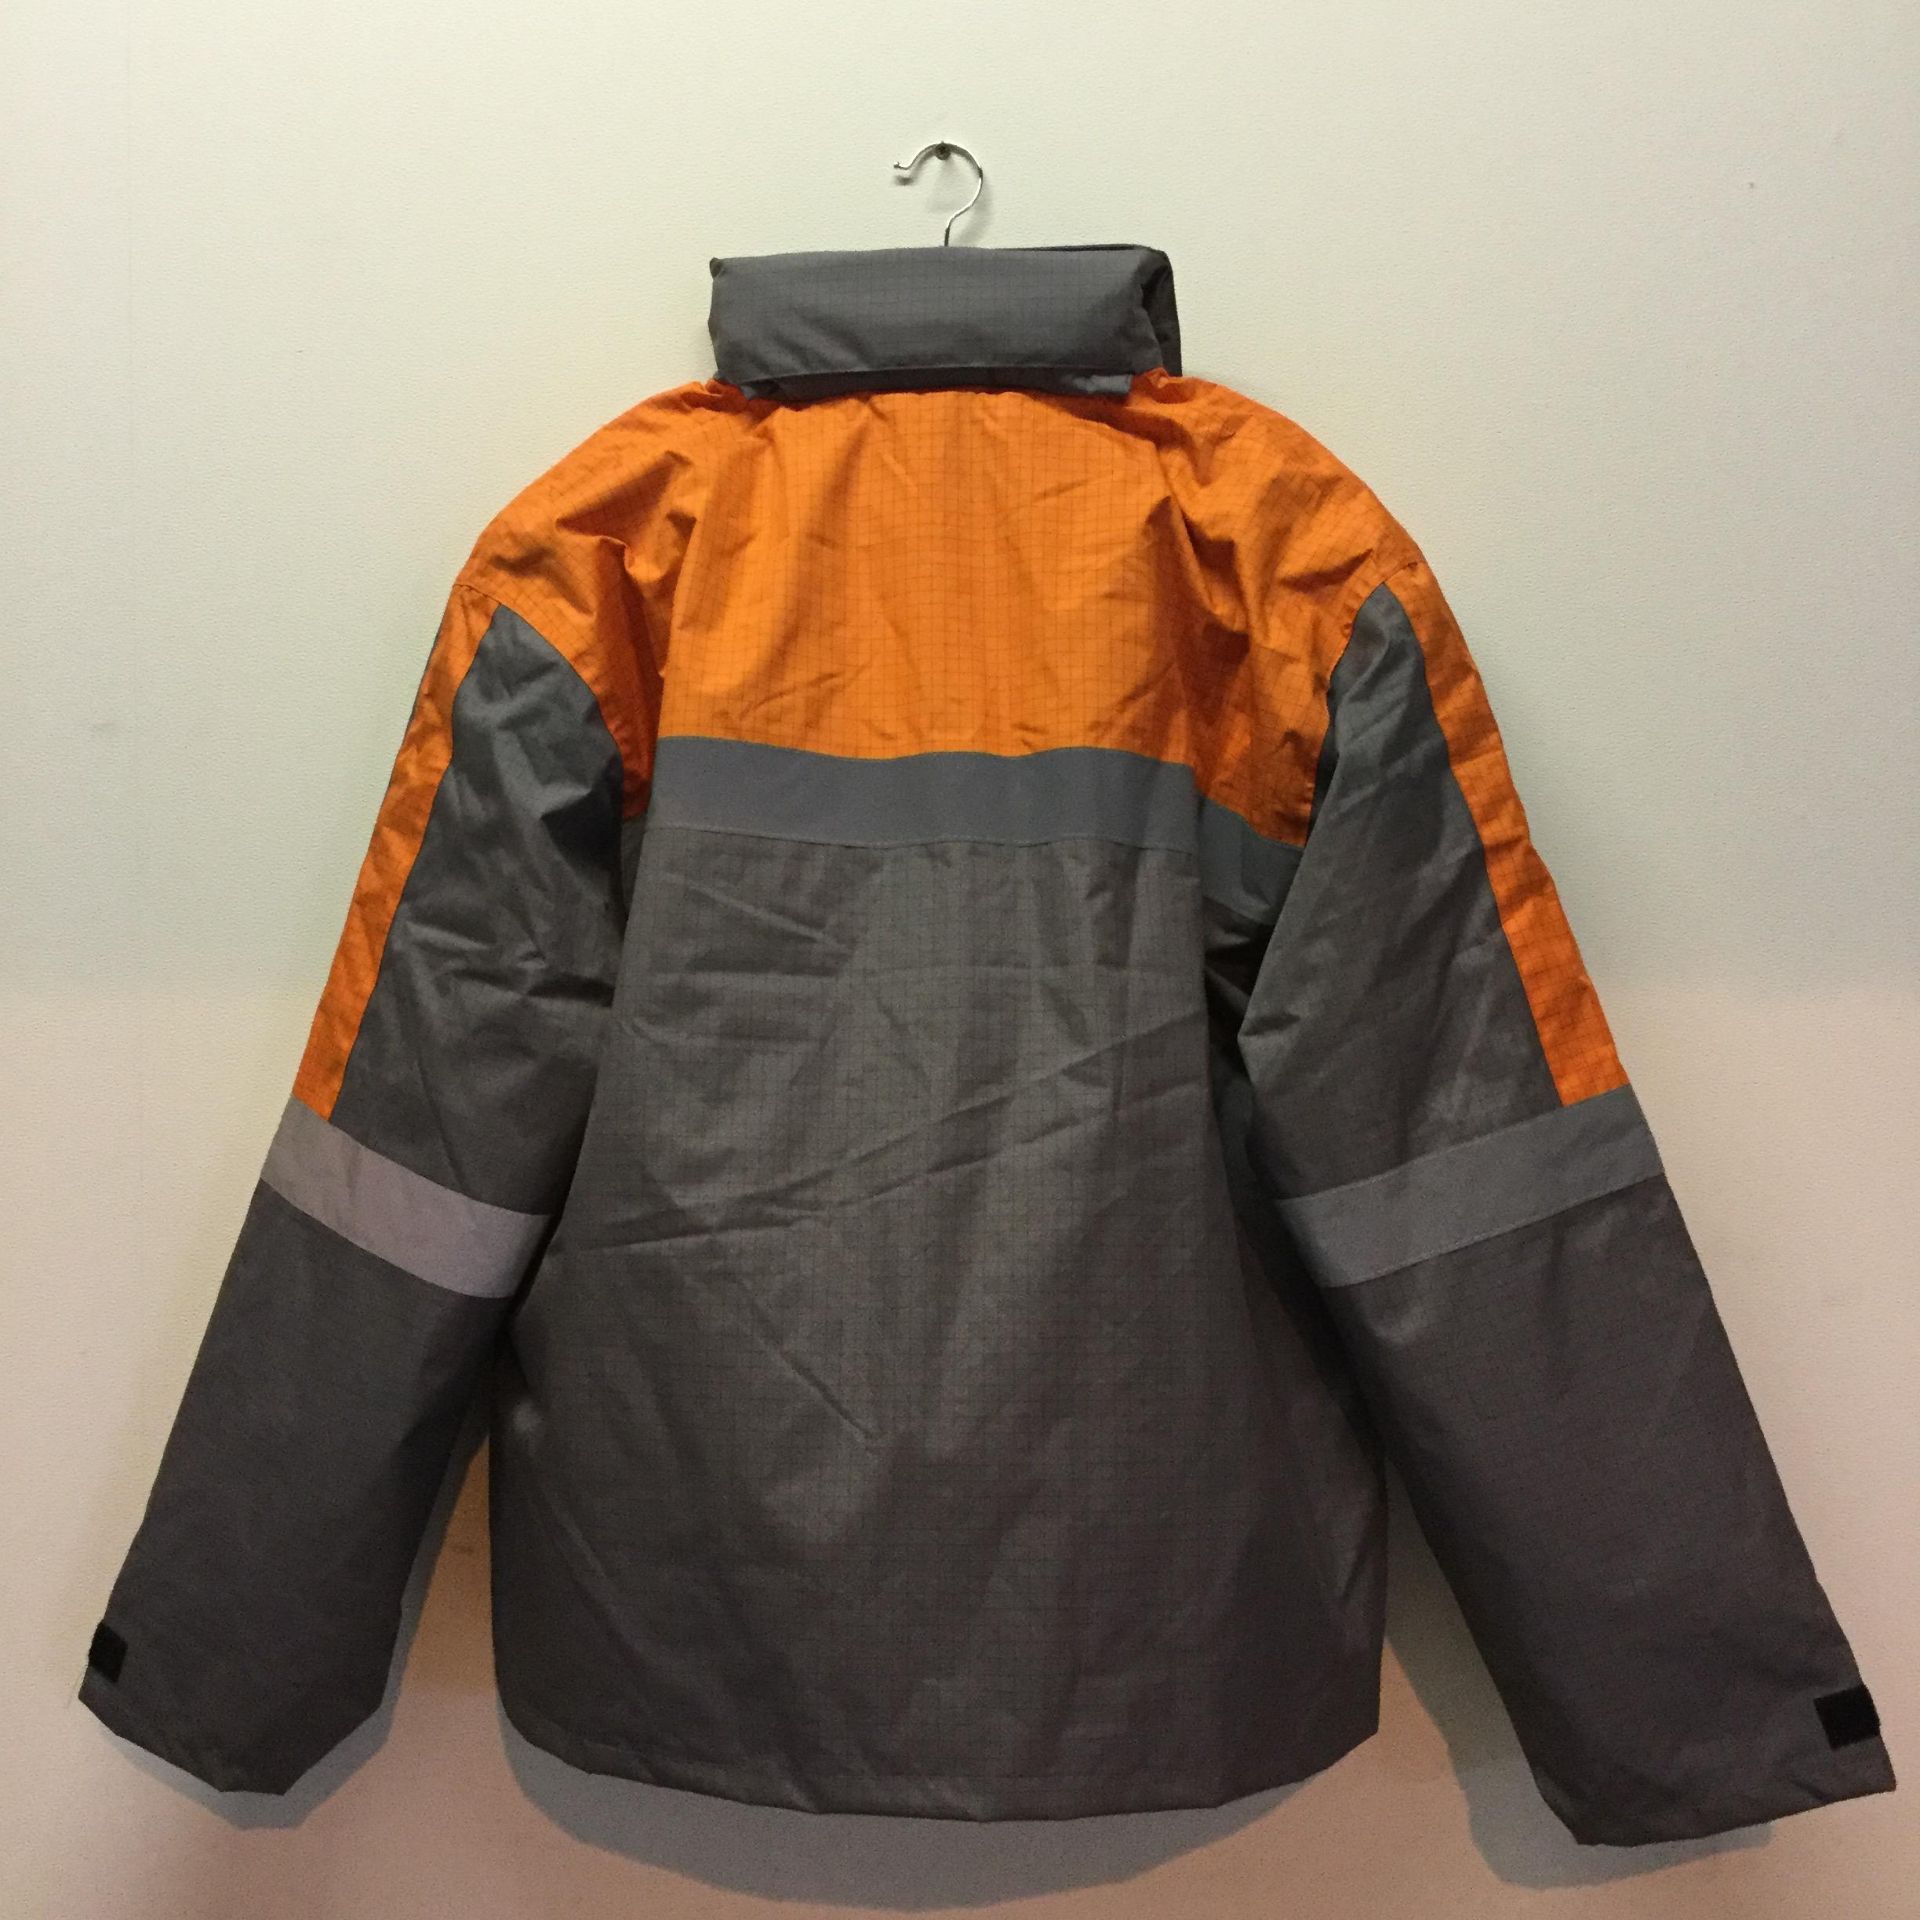 All Weather 3 layer Gortex Antistatic waterproof Jackets - Size 62 - Image 2 of 2